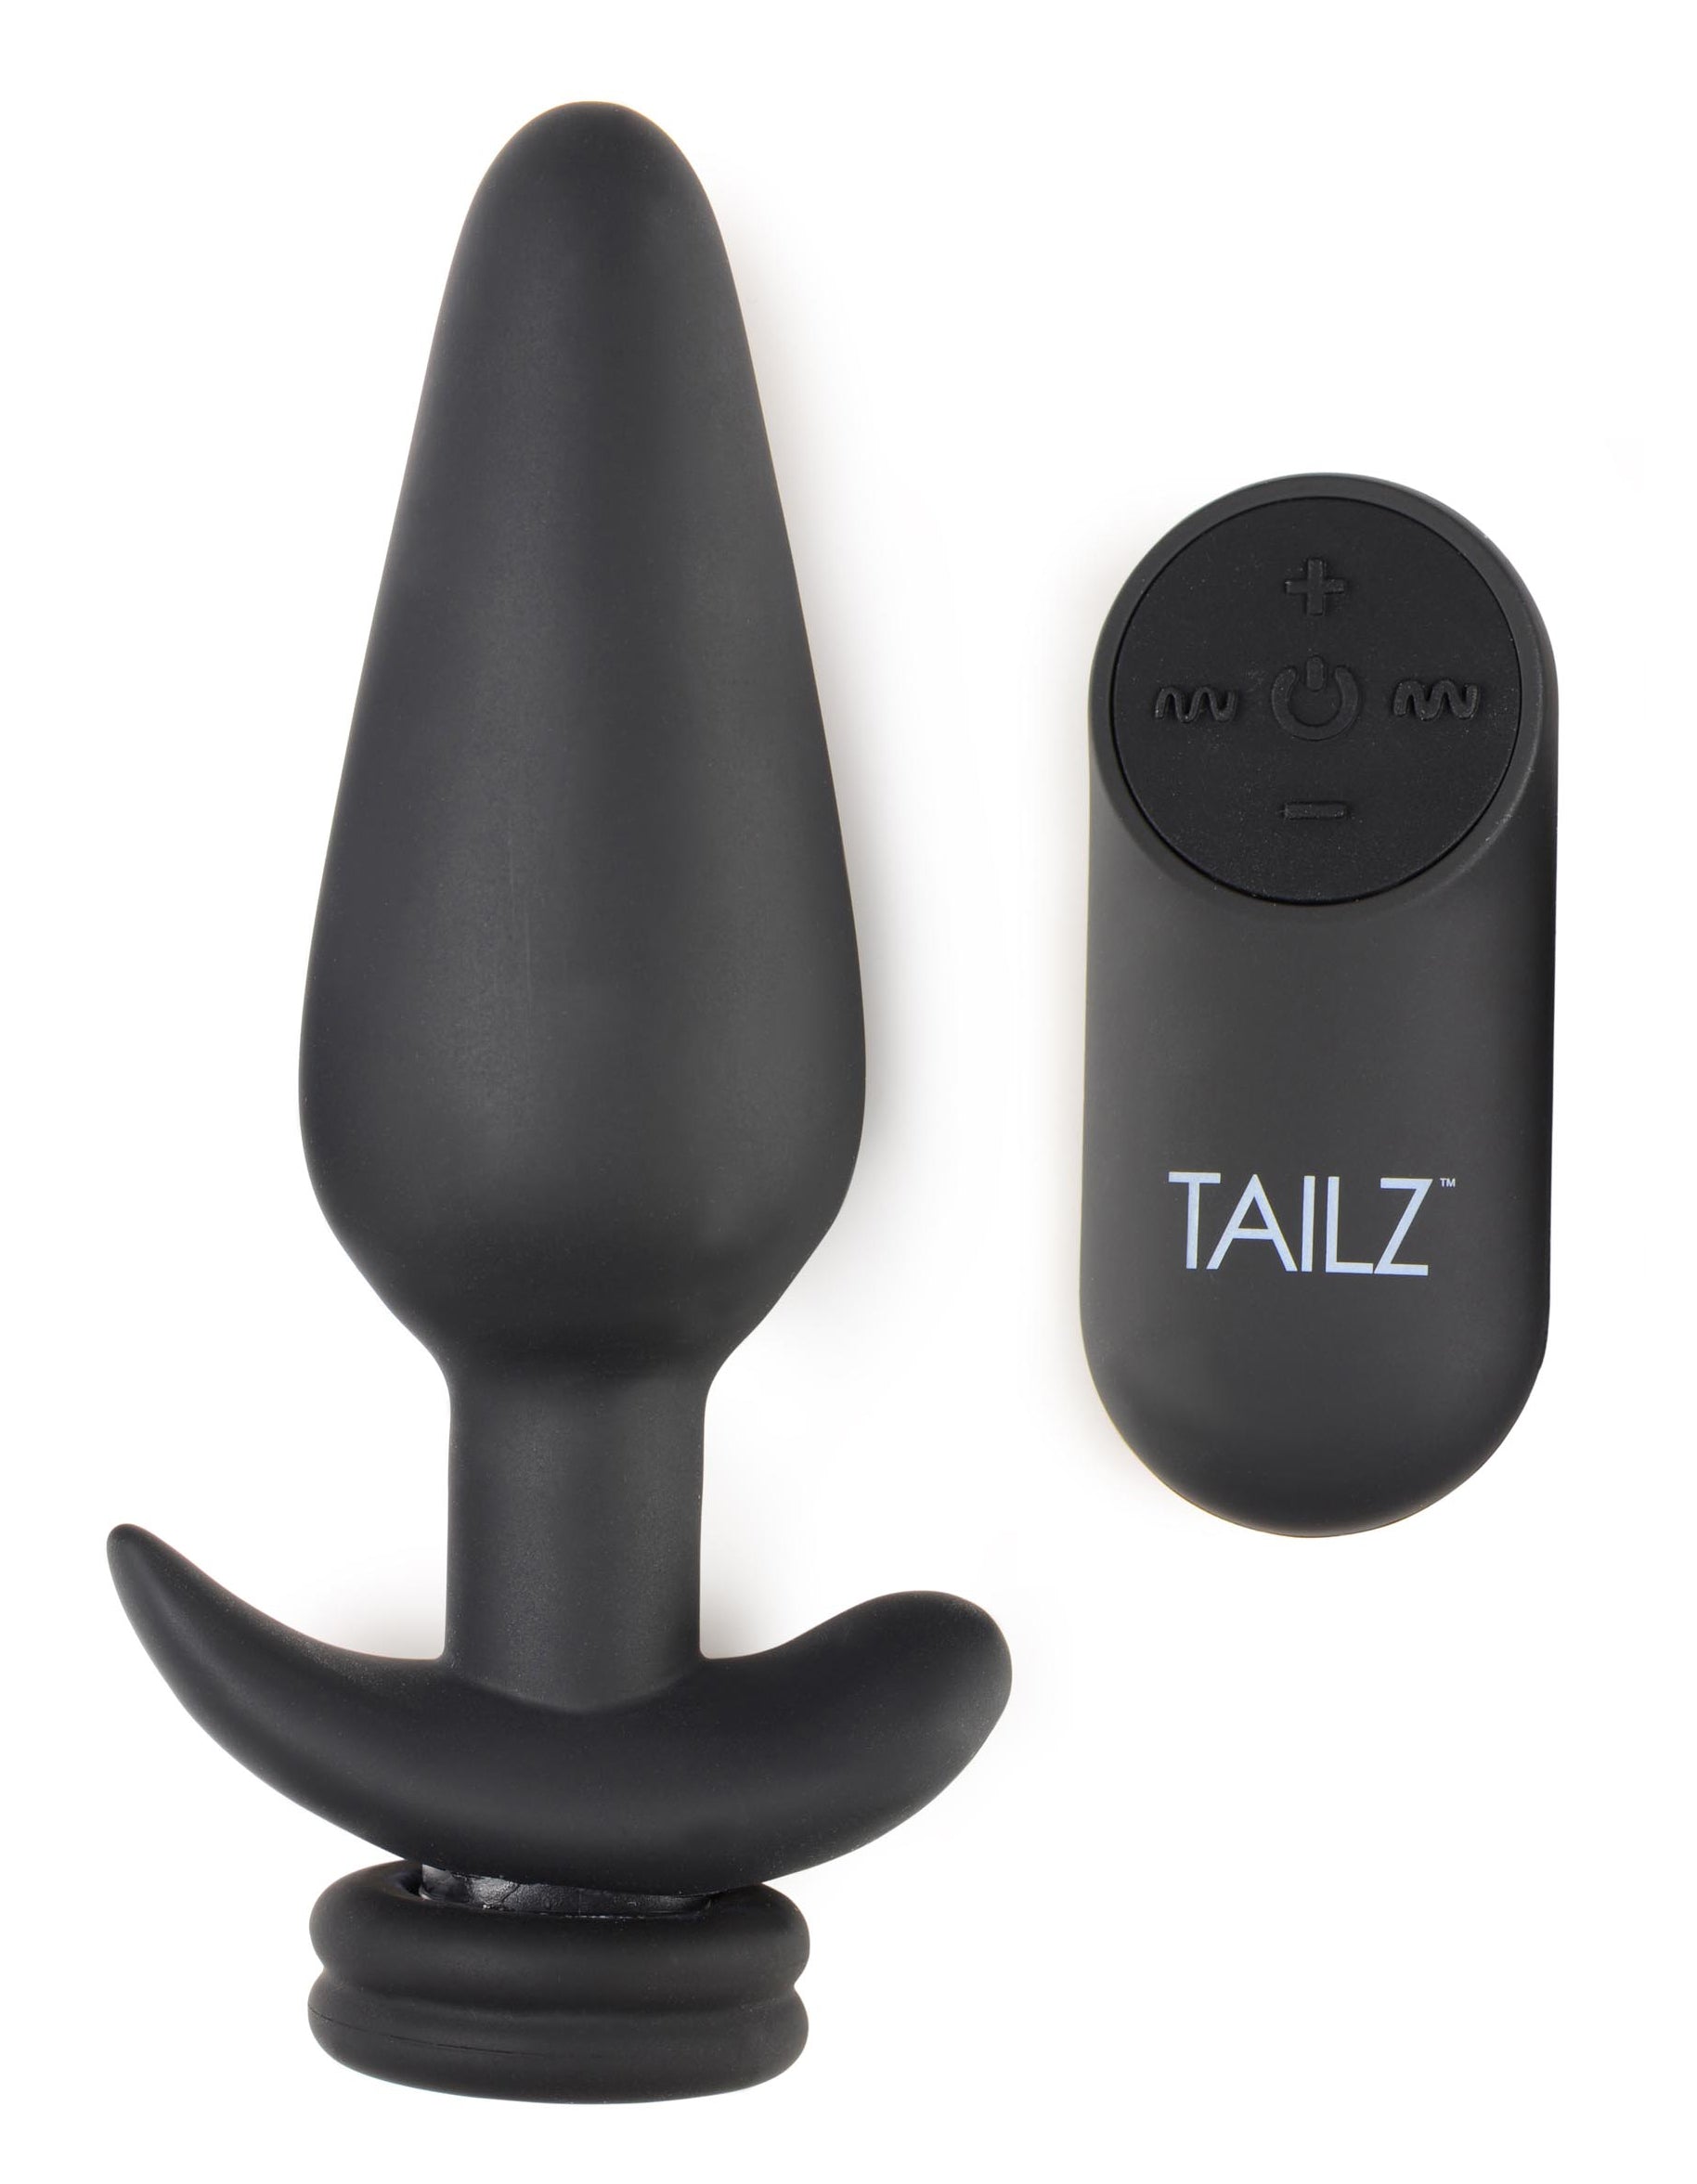 Large Vibrating Anal Plug with Interchangeable Fox Tail